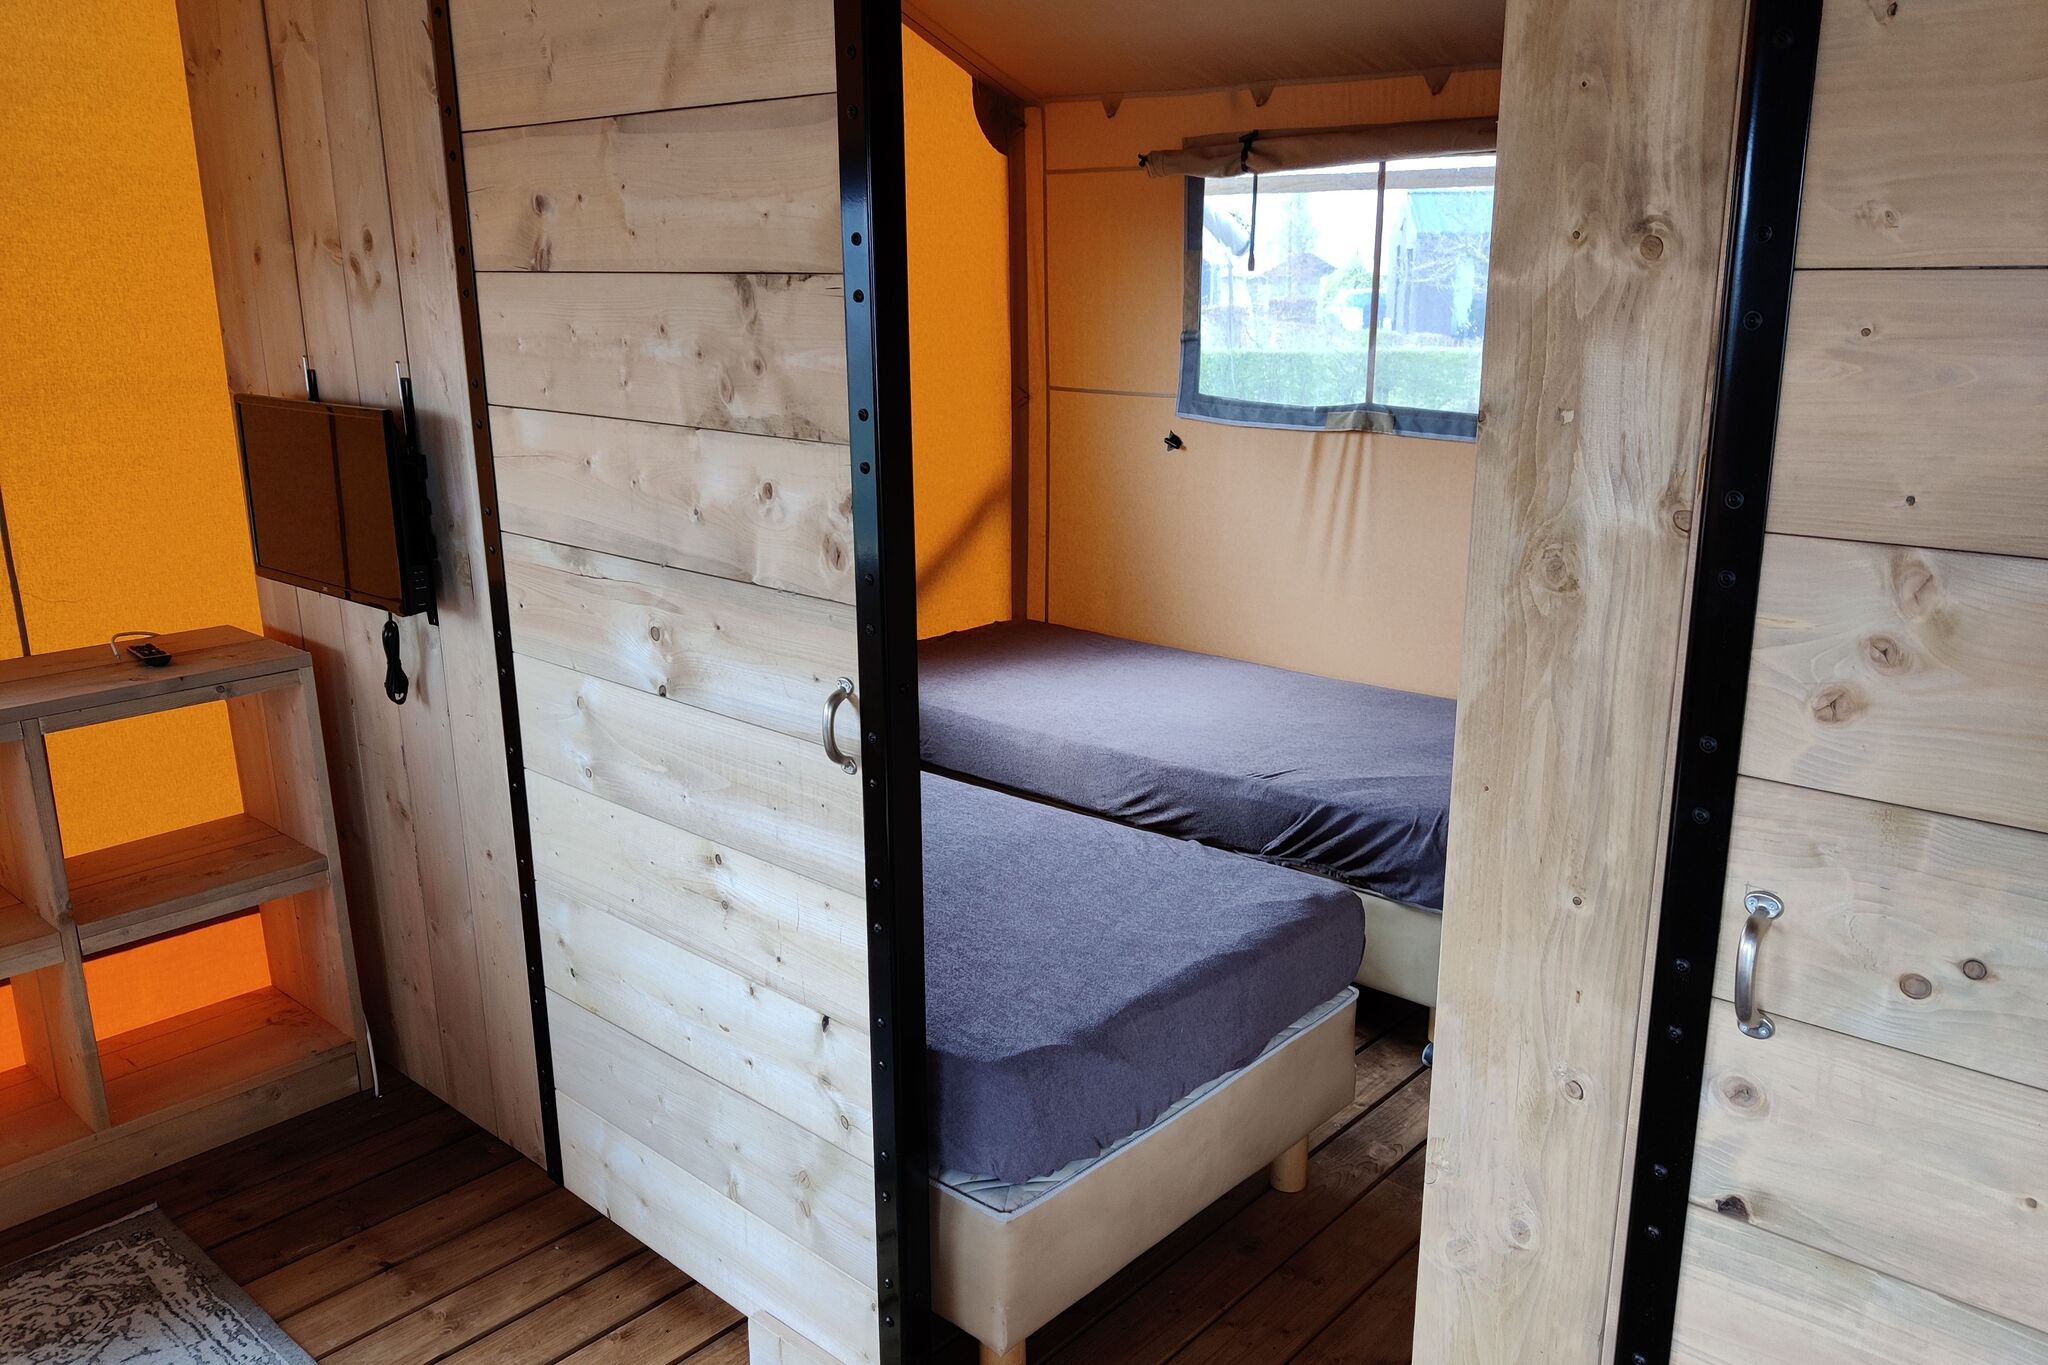 Glamping tent with AC and a view of the Kuinderbos